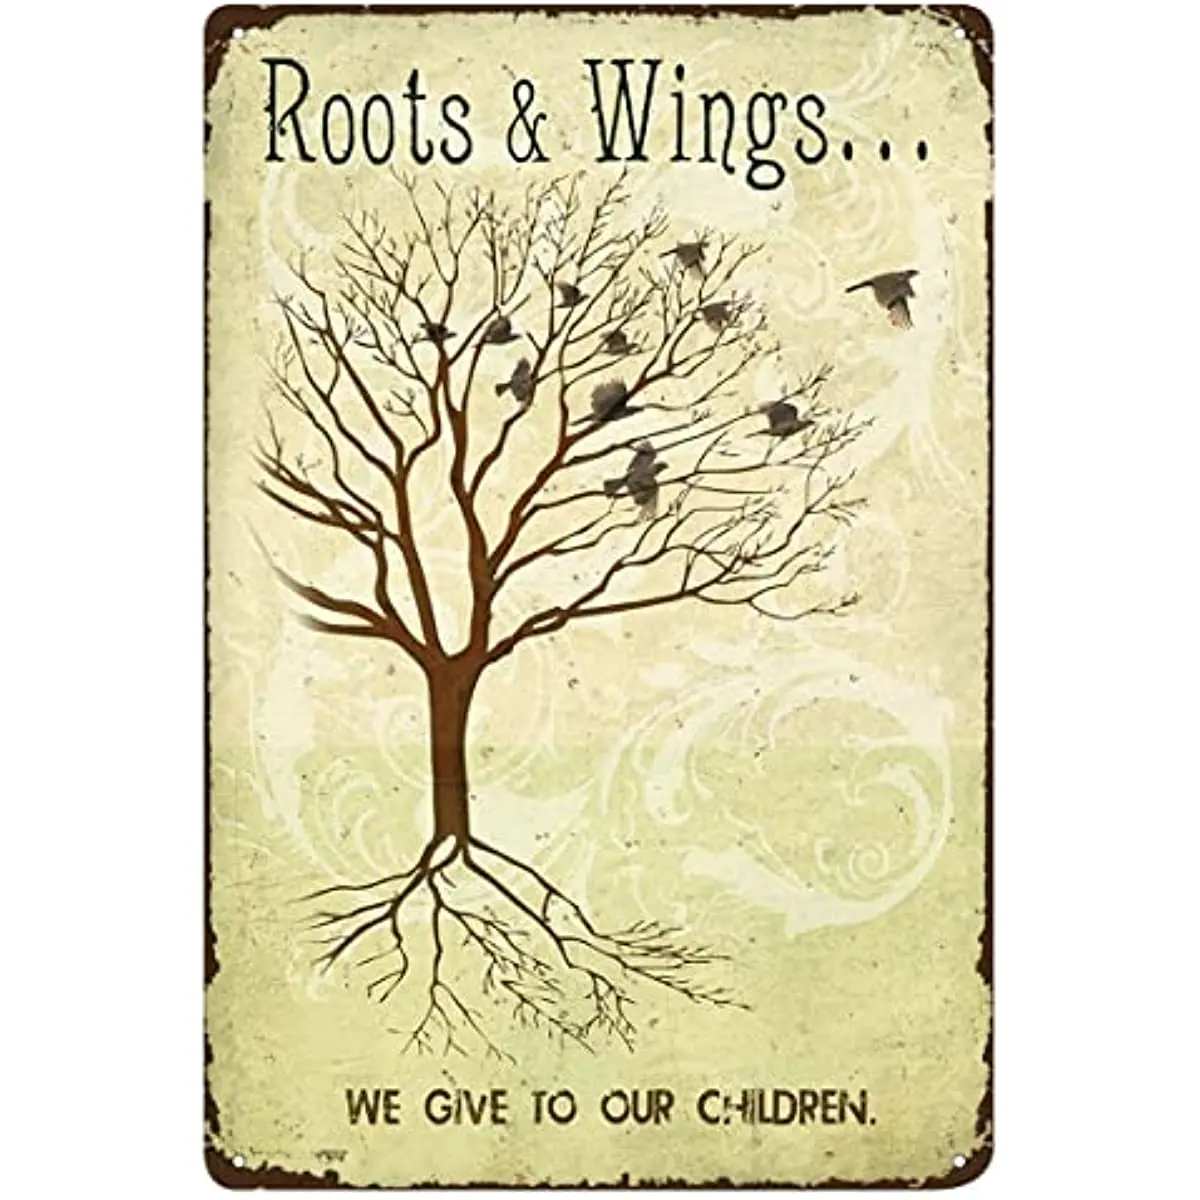 

Metal Tin Sign Roots And Wings Nature Metal Signs Poster Wall Decor Design for Cafes Bar Pub Beer Club Wall Home Decor 8x12inch